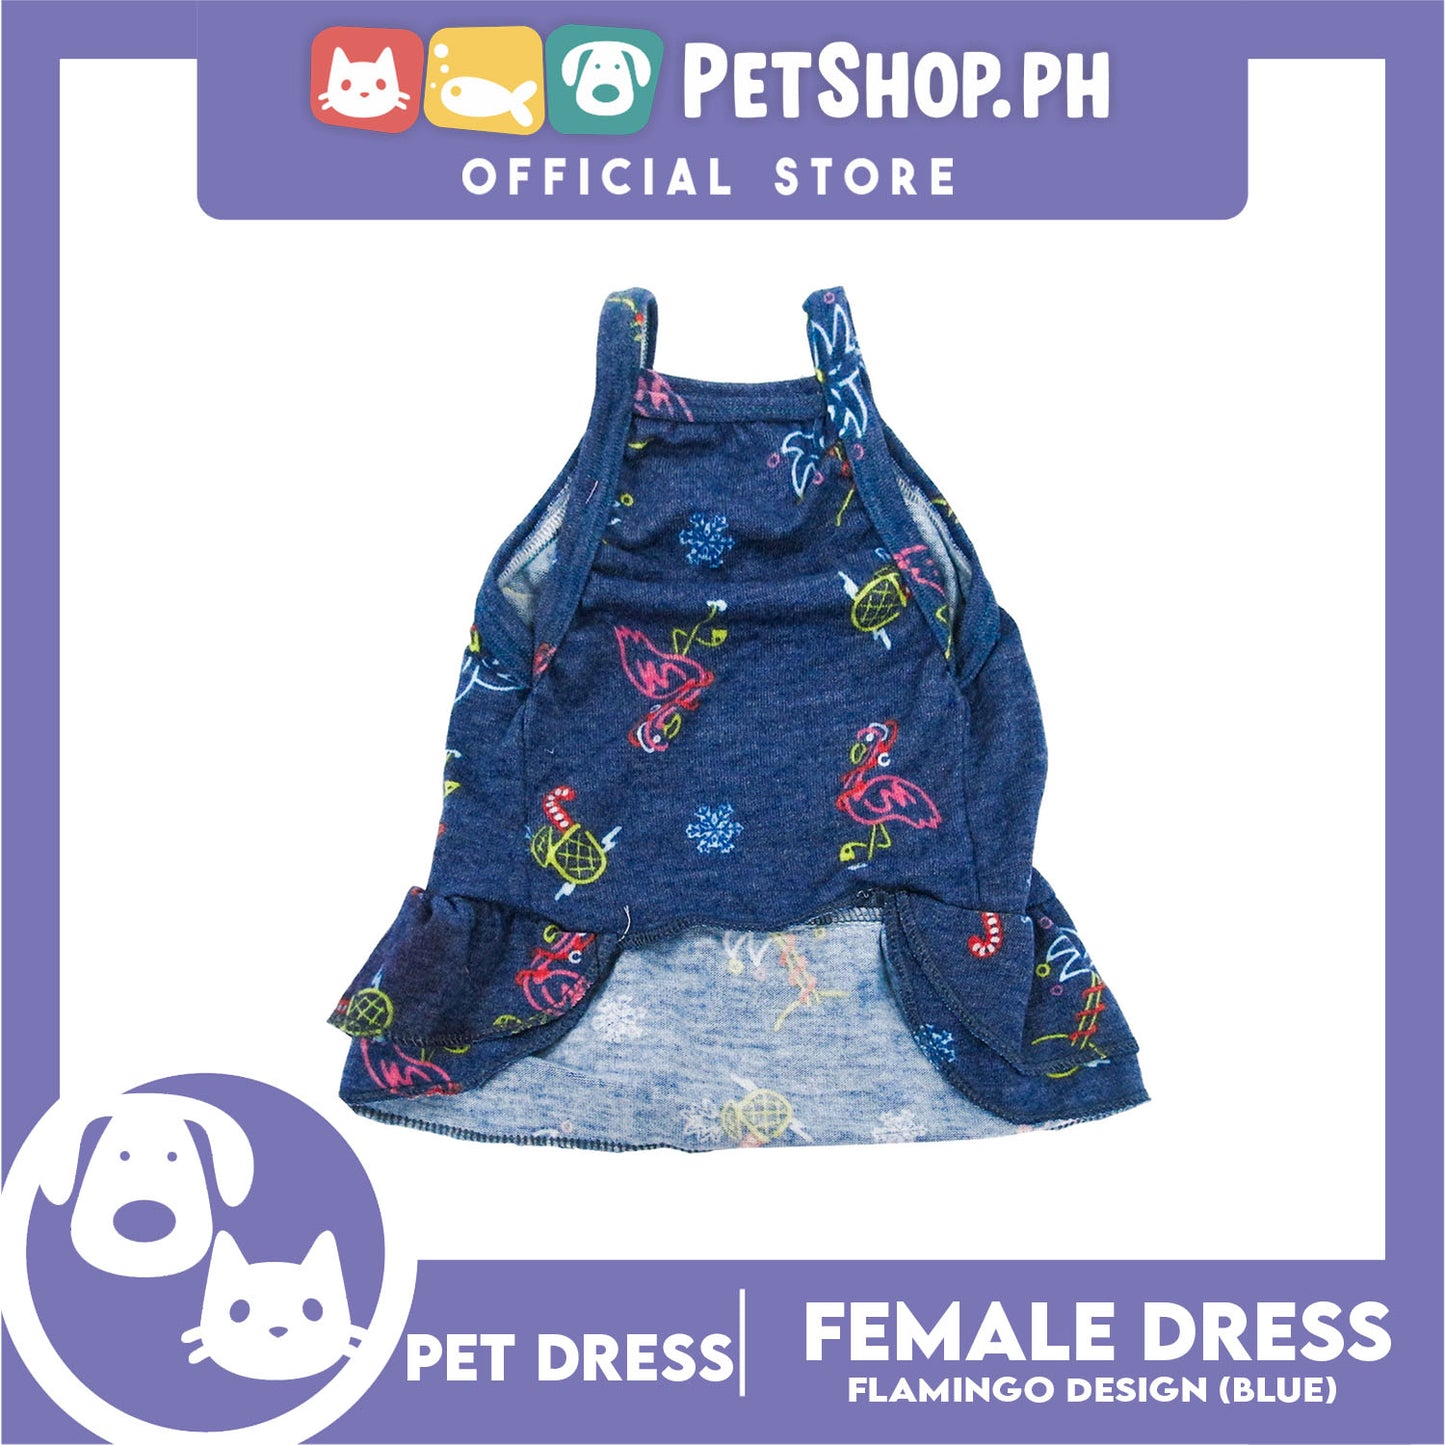 Pet Dress Flamingo Design Skirt Blue (Small) Perfect fit for Small Breed Dogs and Cats